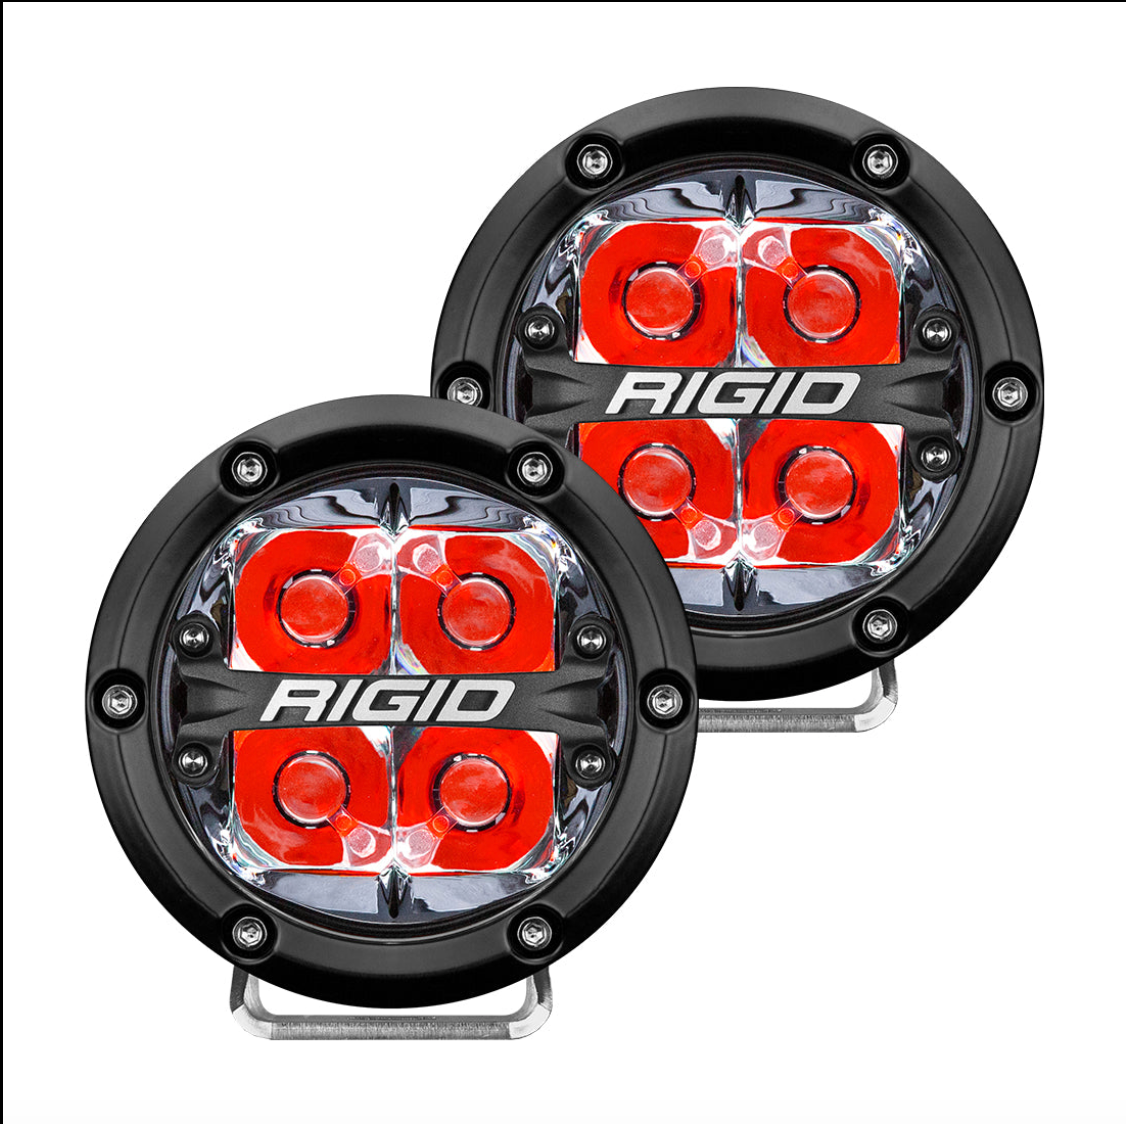 Rigid Industries 360-Series 4 Inch Led Off-Road Spot Beam White Blue Red Amber Backlight Pair